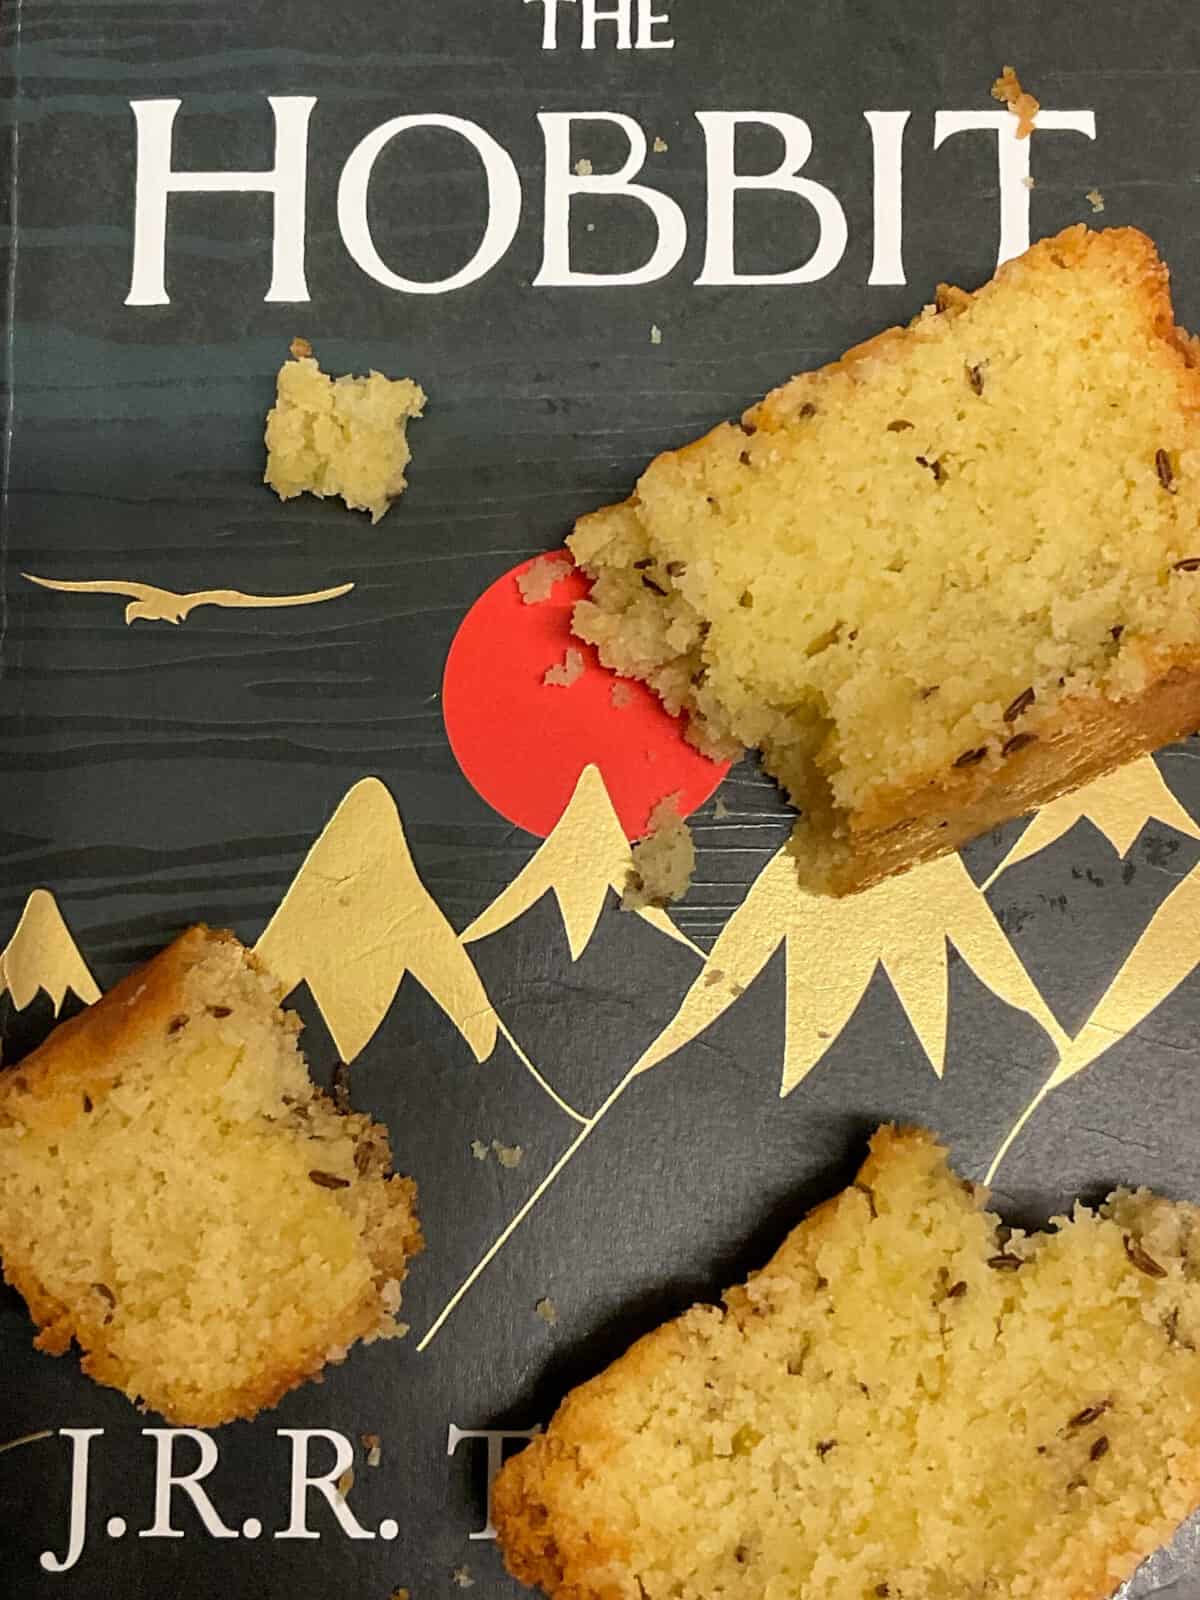 A close up image of The Hobbit book with a black cover and mountain and eagle images, bits of seed cake over the book.